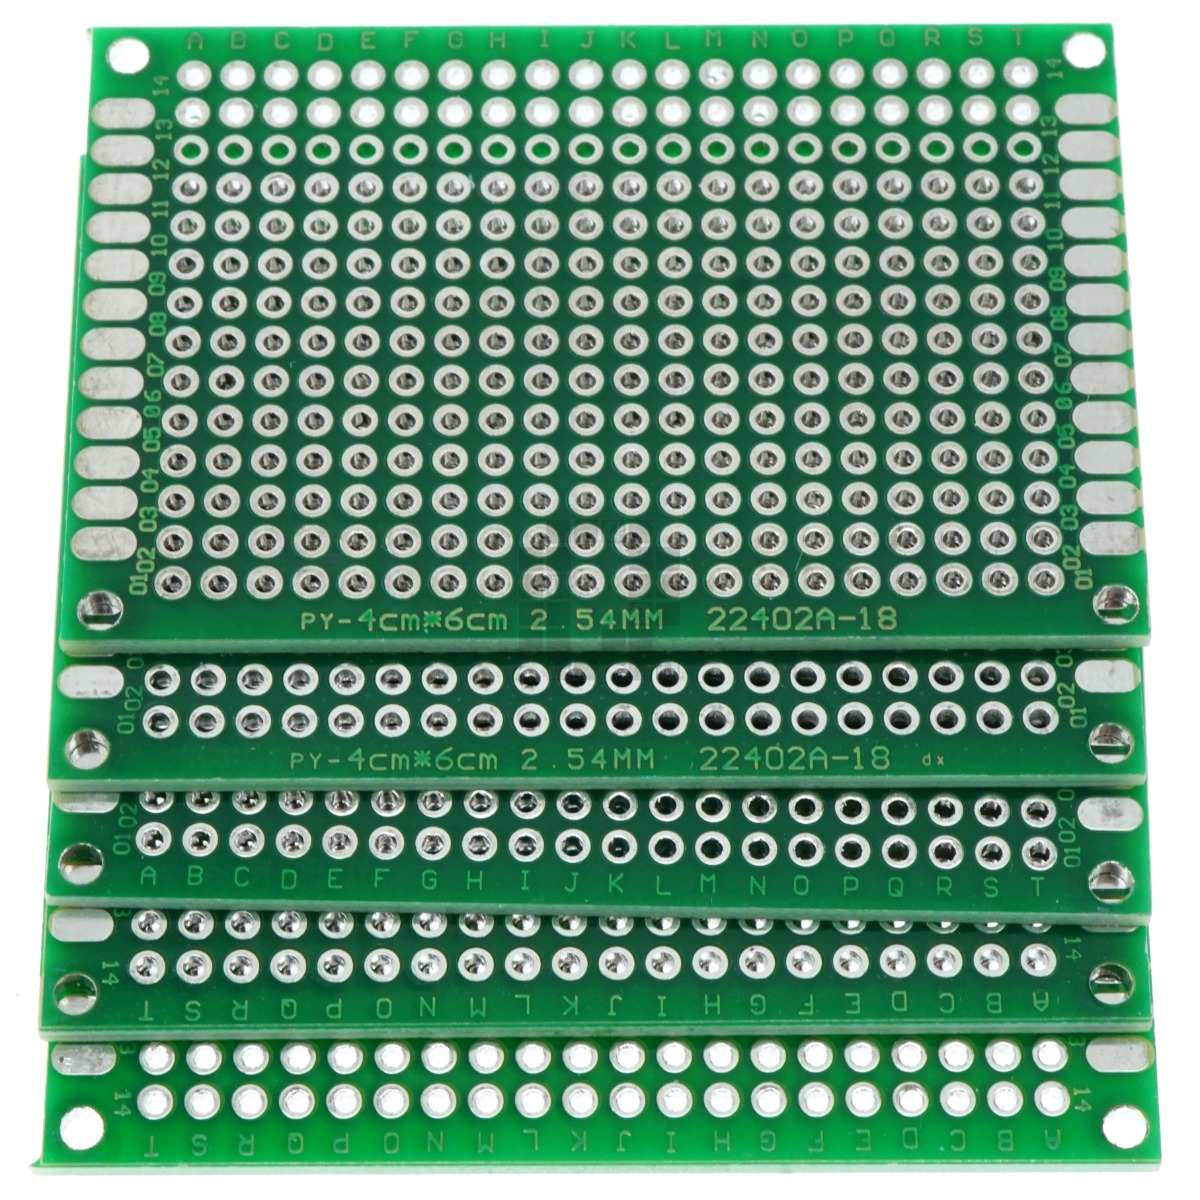 4cm x 6cm Unbranded Green PCB Printed Circuit Board, 5 Pack, 280 Holes, 24 Pads